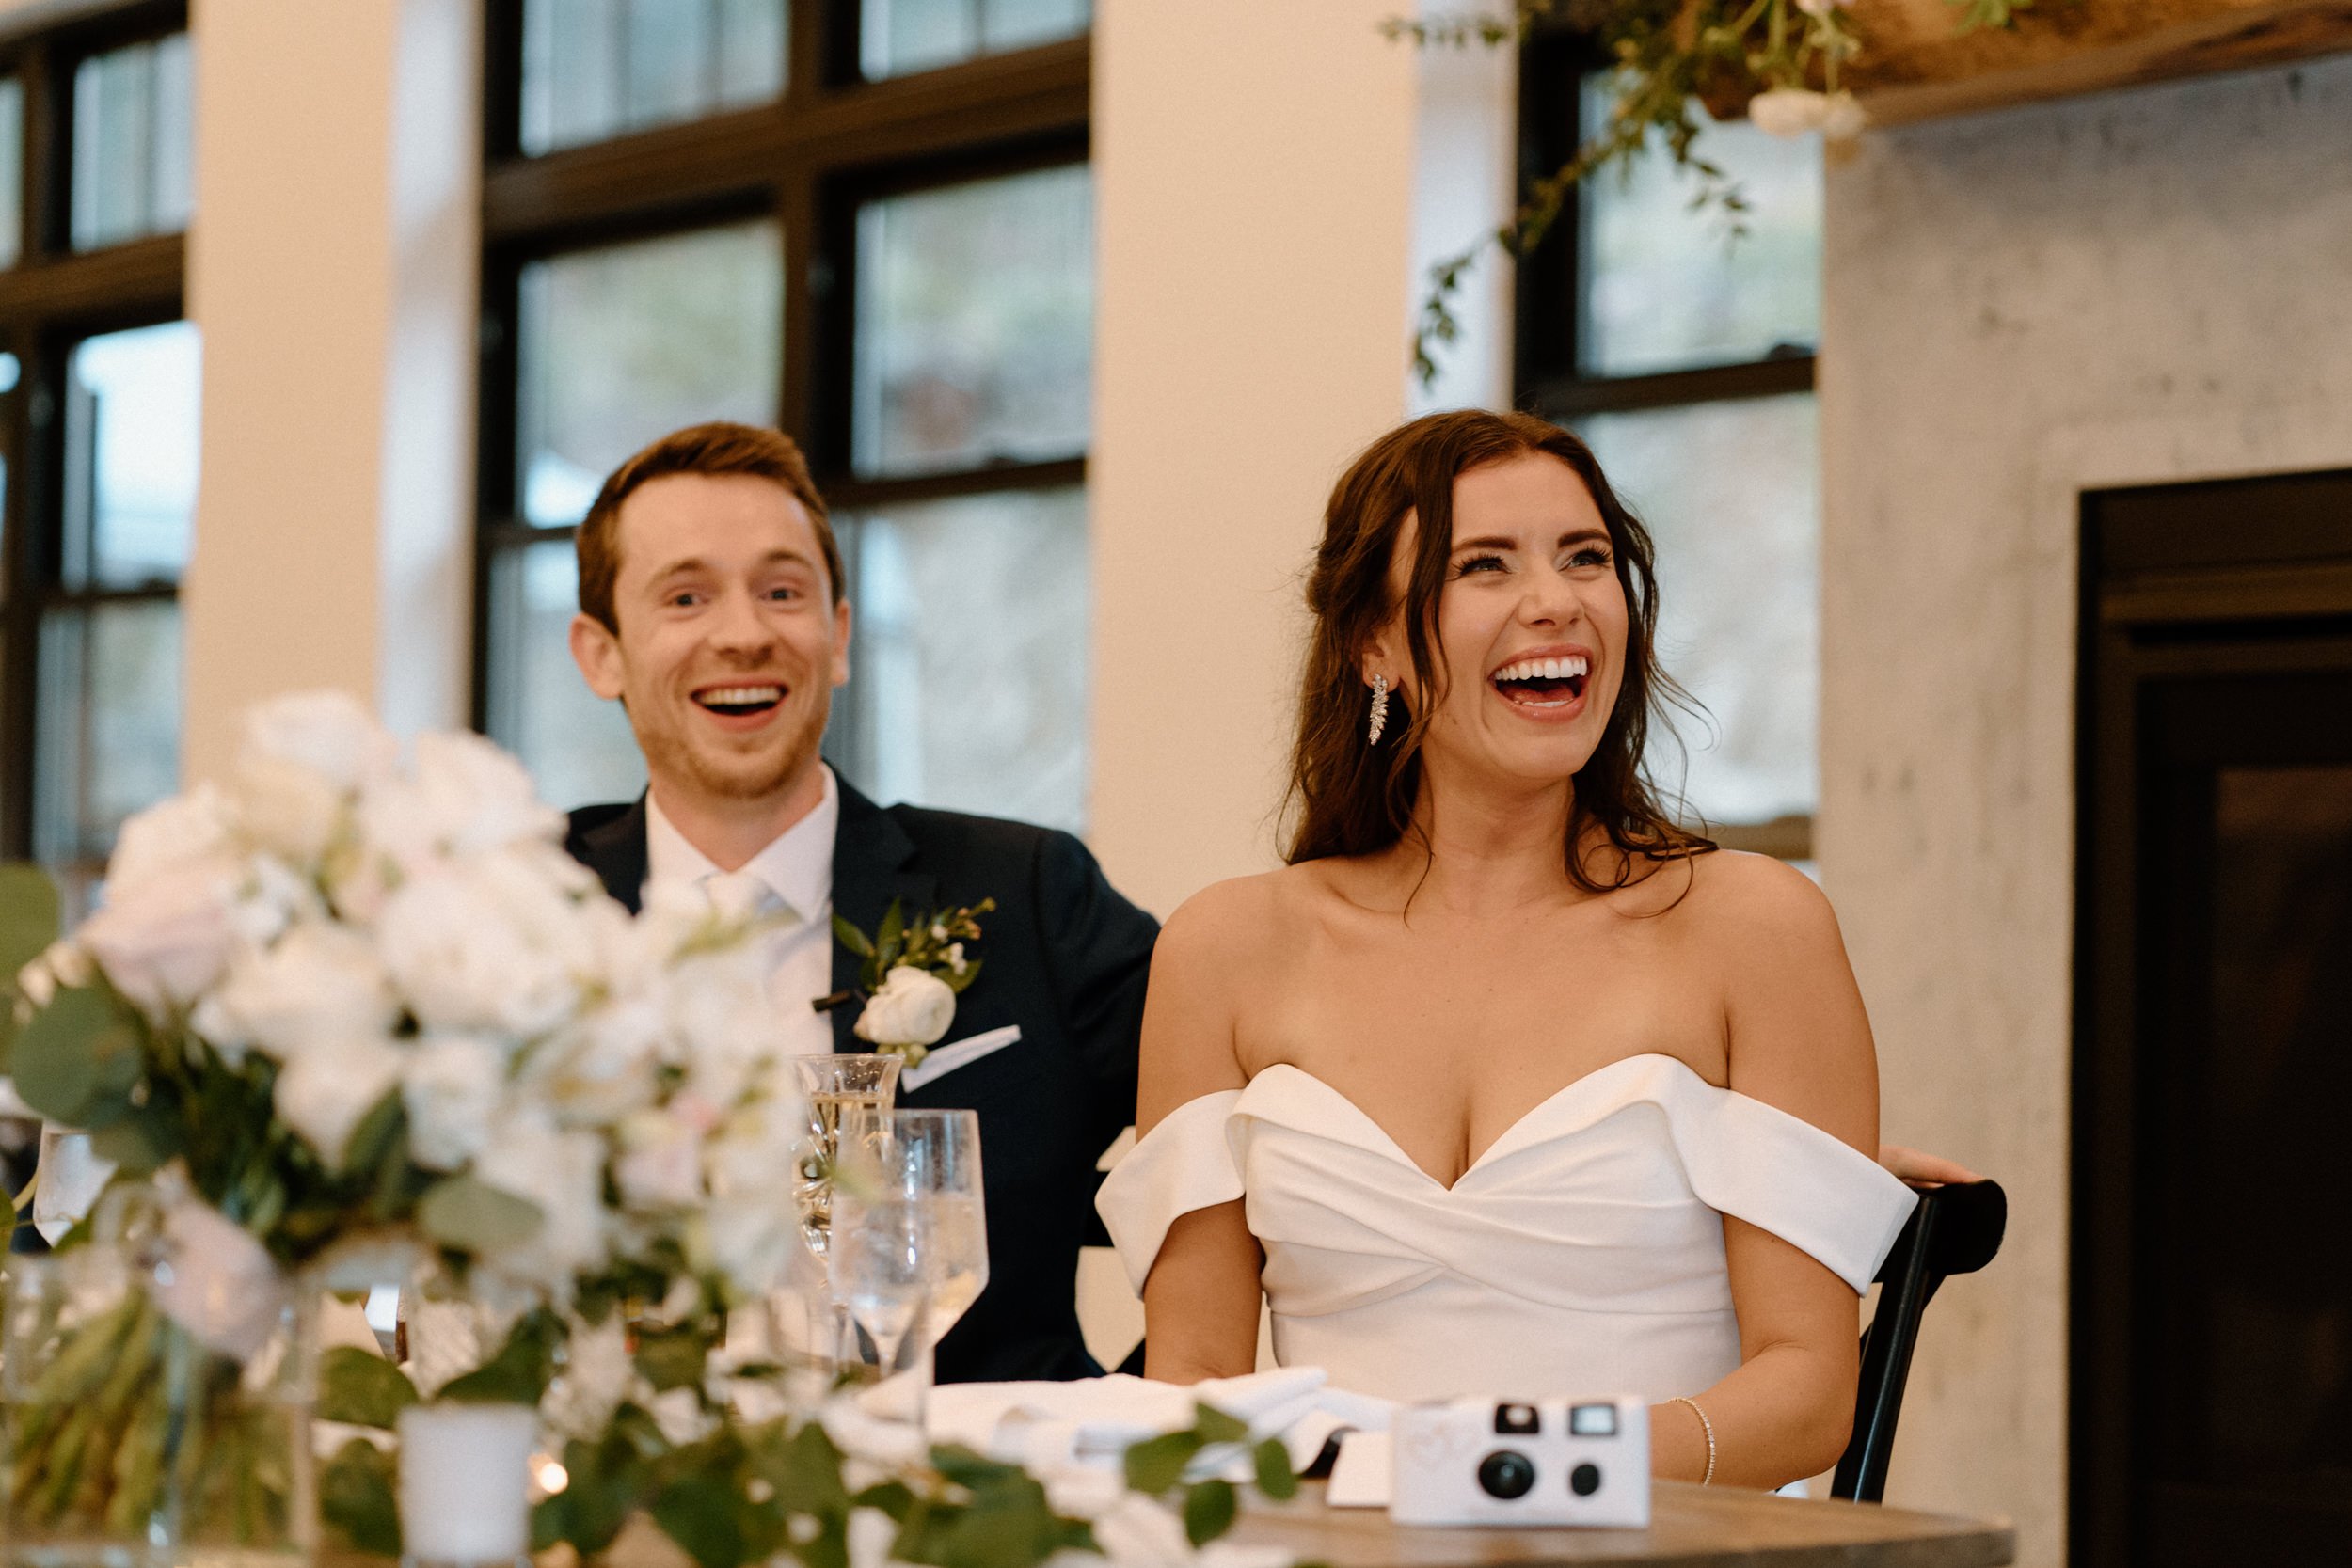 The bride and groom laugh during the toasts